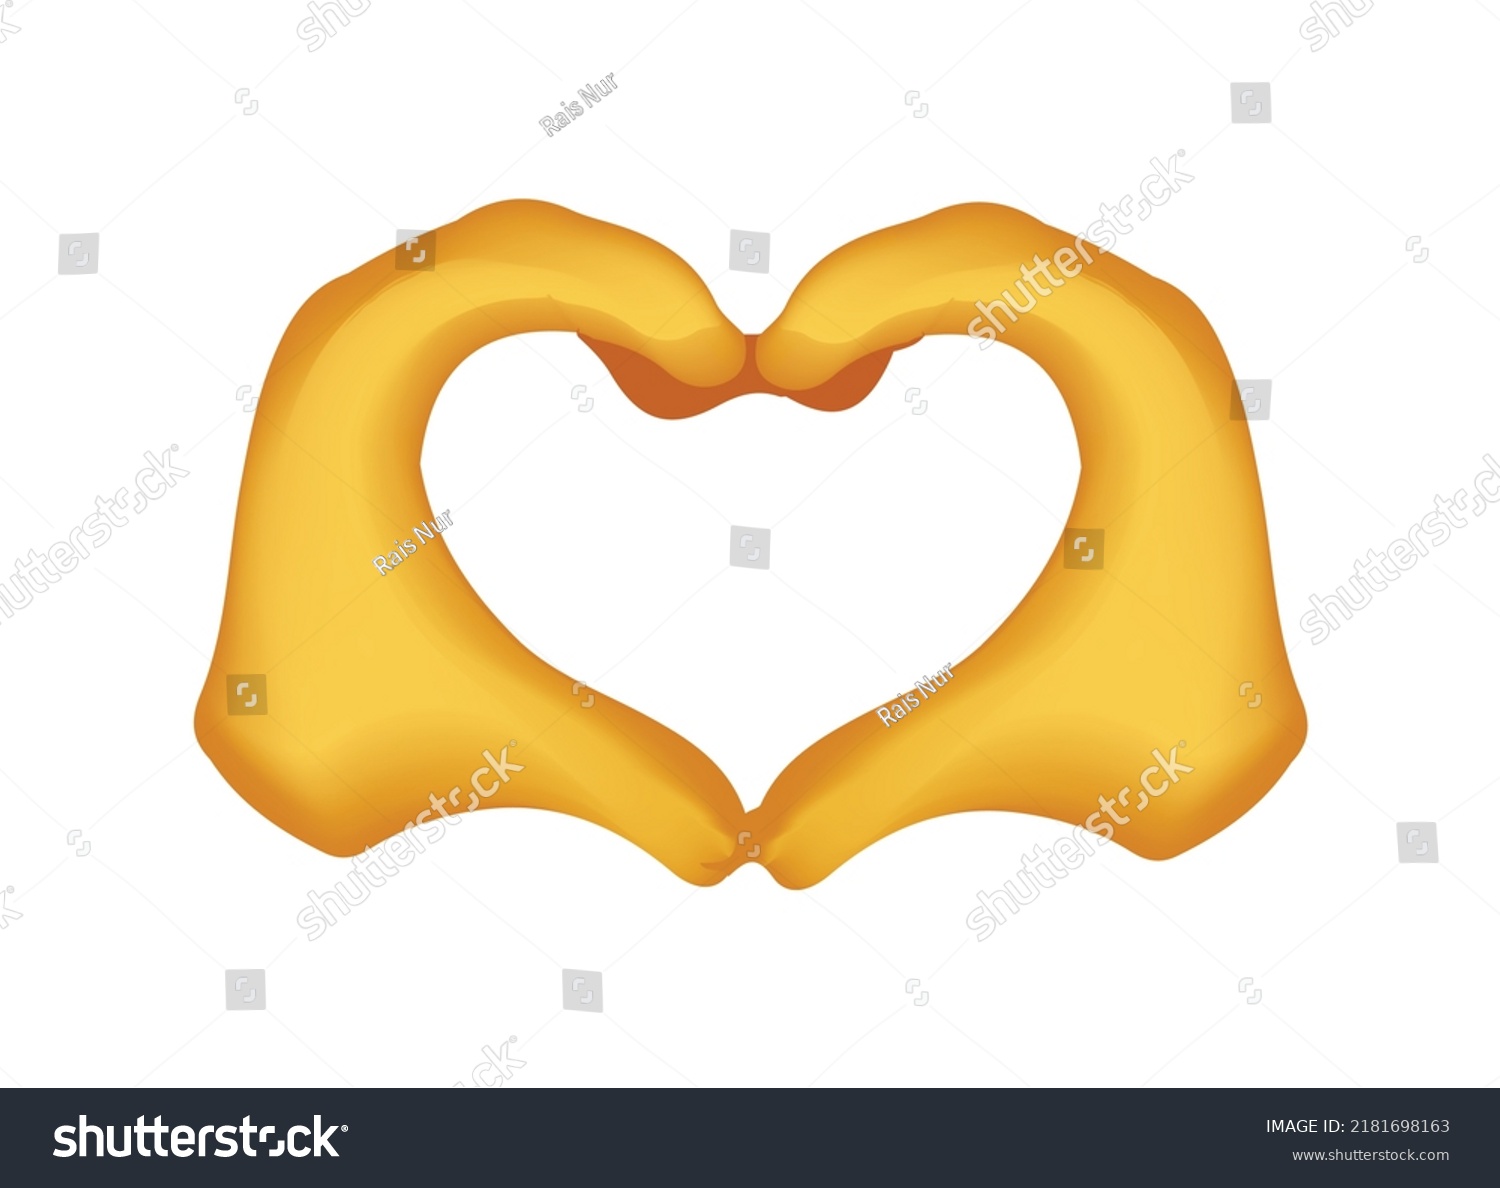 SVG of hand love logo symbol isolated white background vector hands yellow cartoon heart emoticons comment social media chat friend reactions, icon template element emoji character message svg